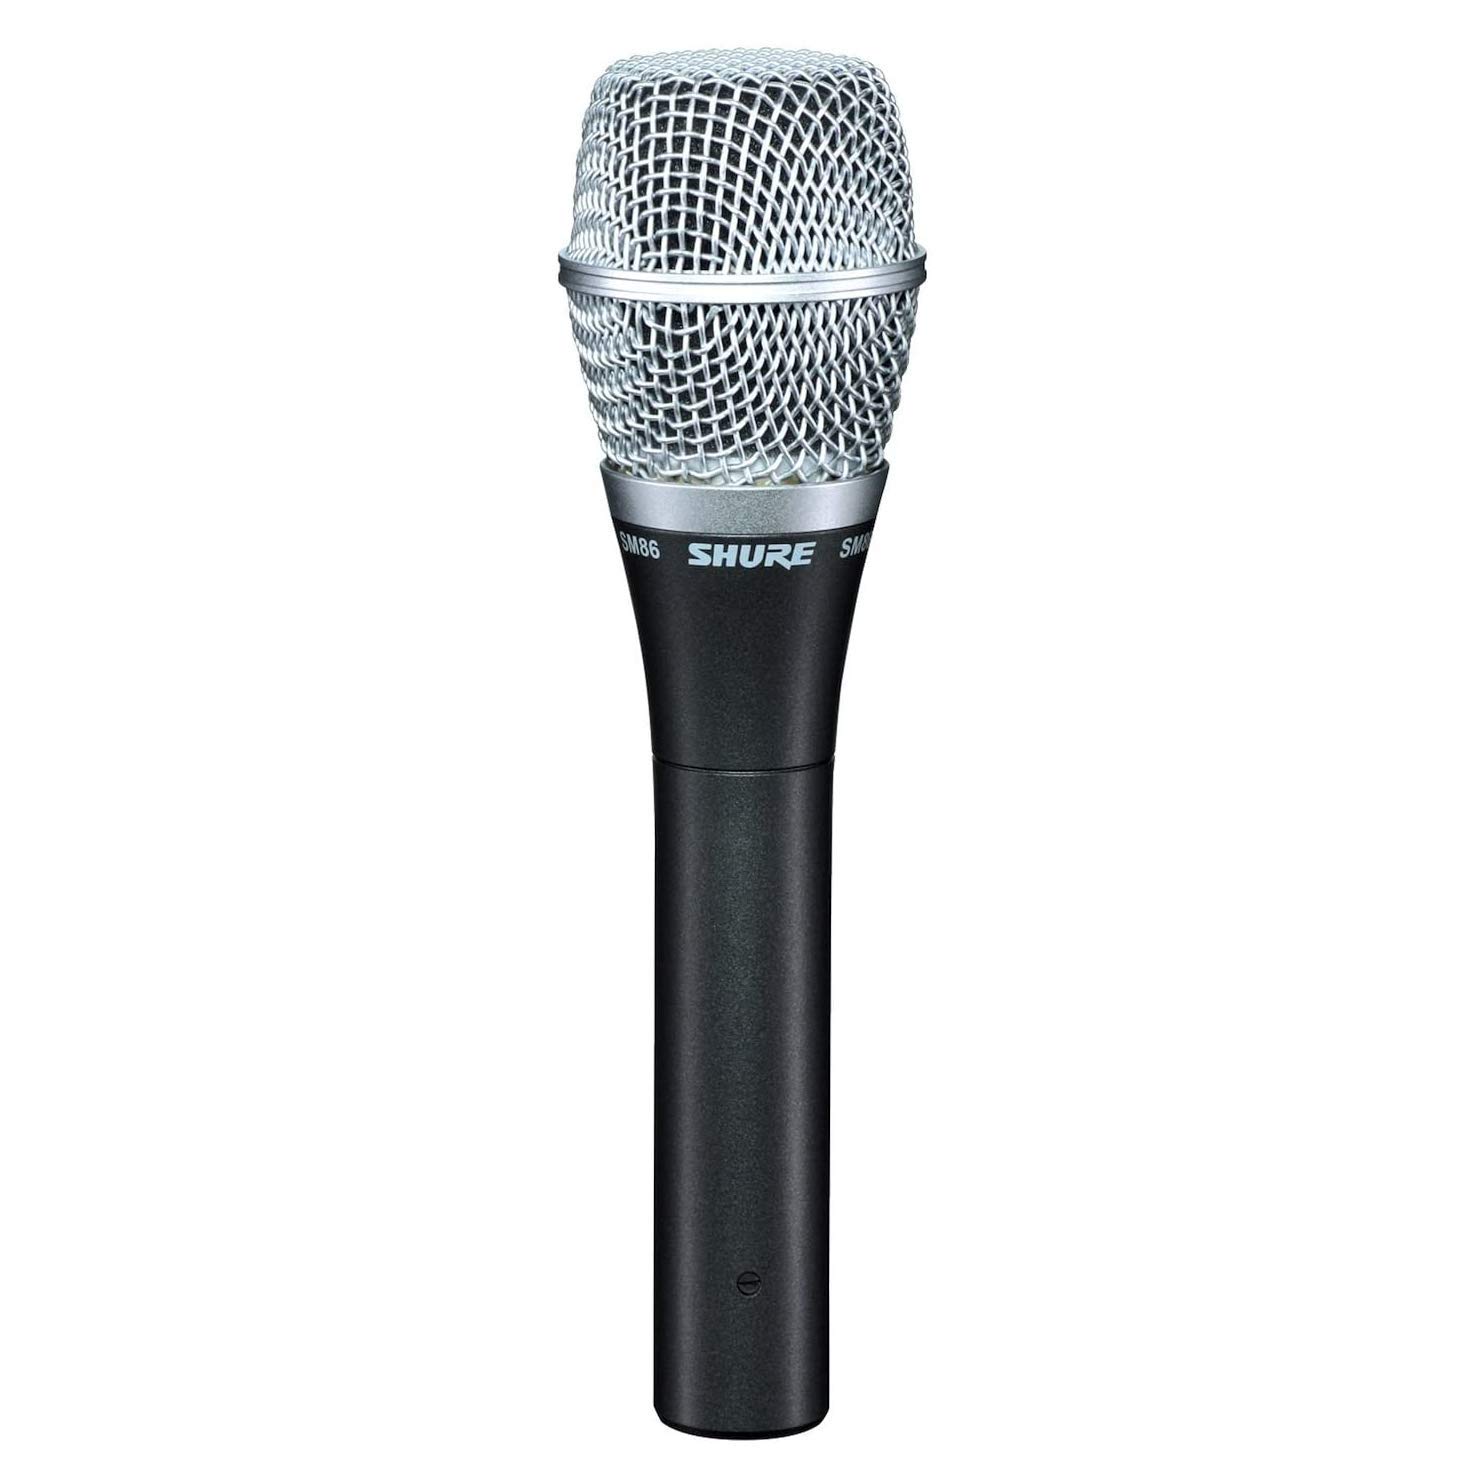 Shure SM86 Cardioid Condenser Vocal Microphone for Prof...